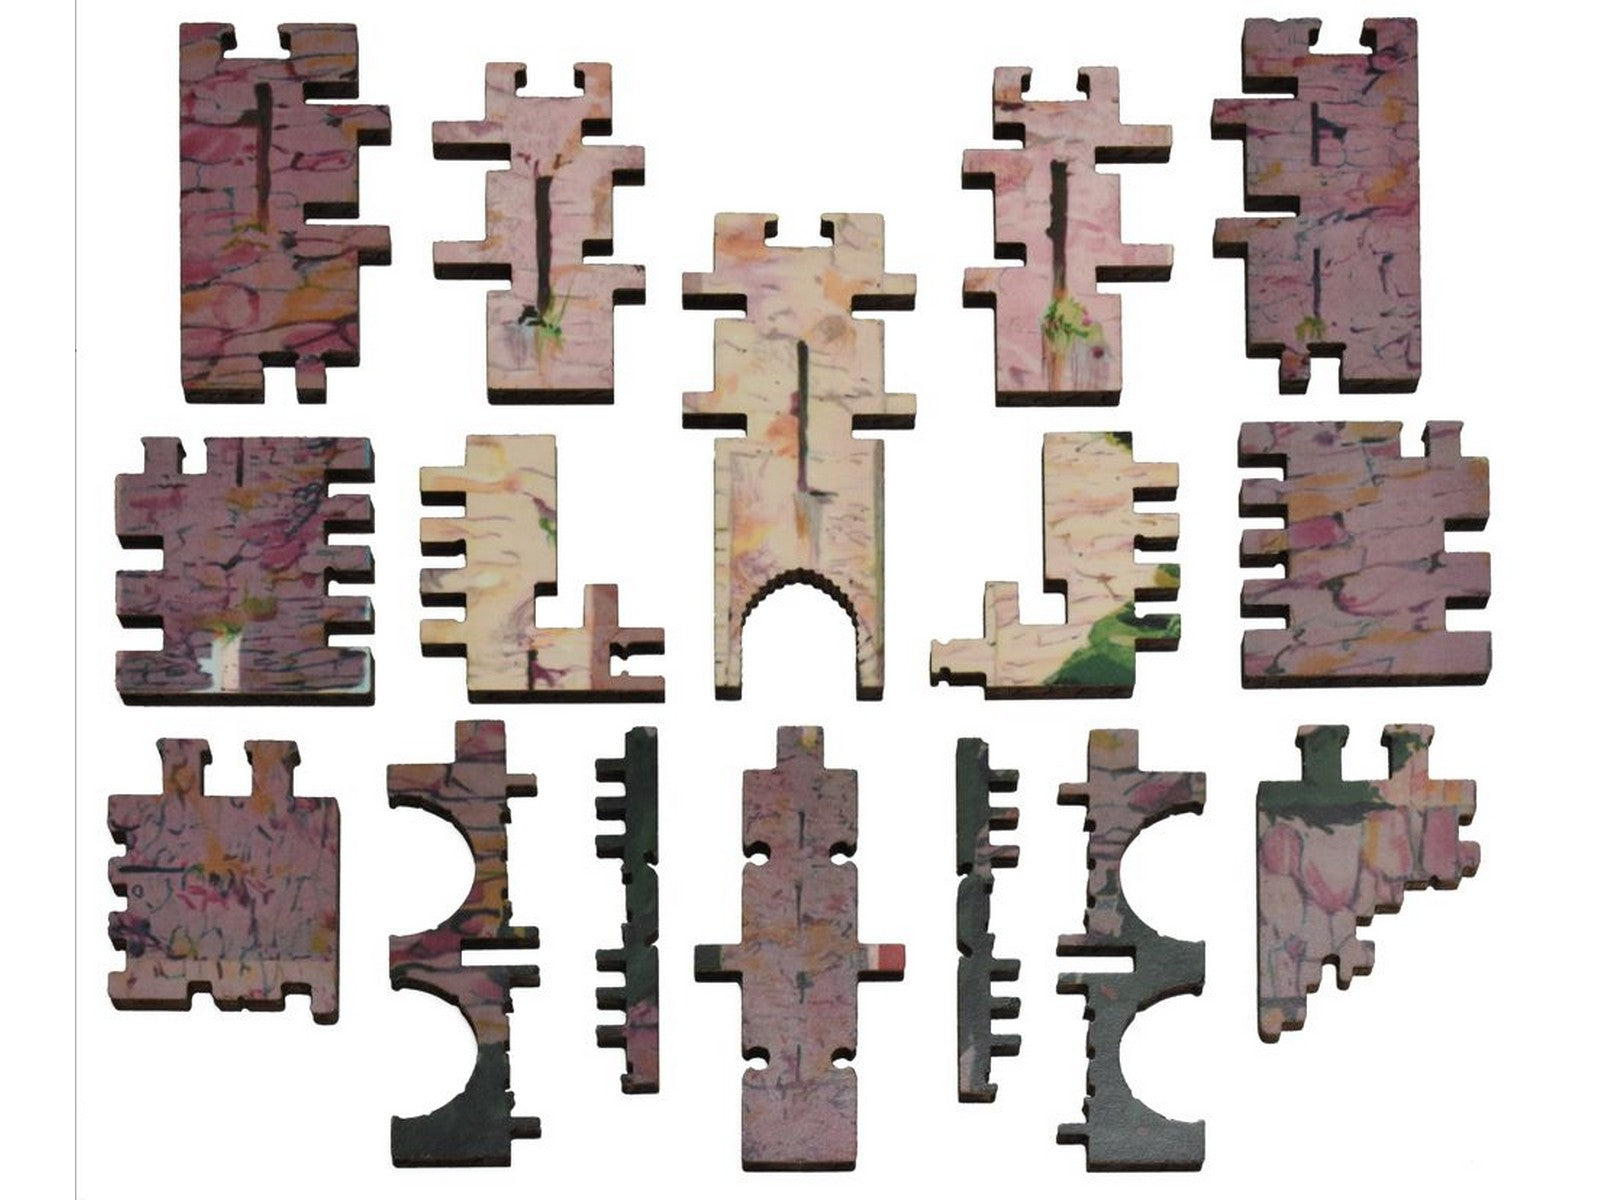 The pieces that when put together make a 3D version of Wisby Castle.